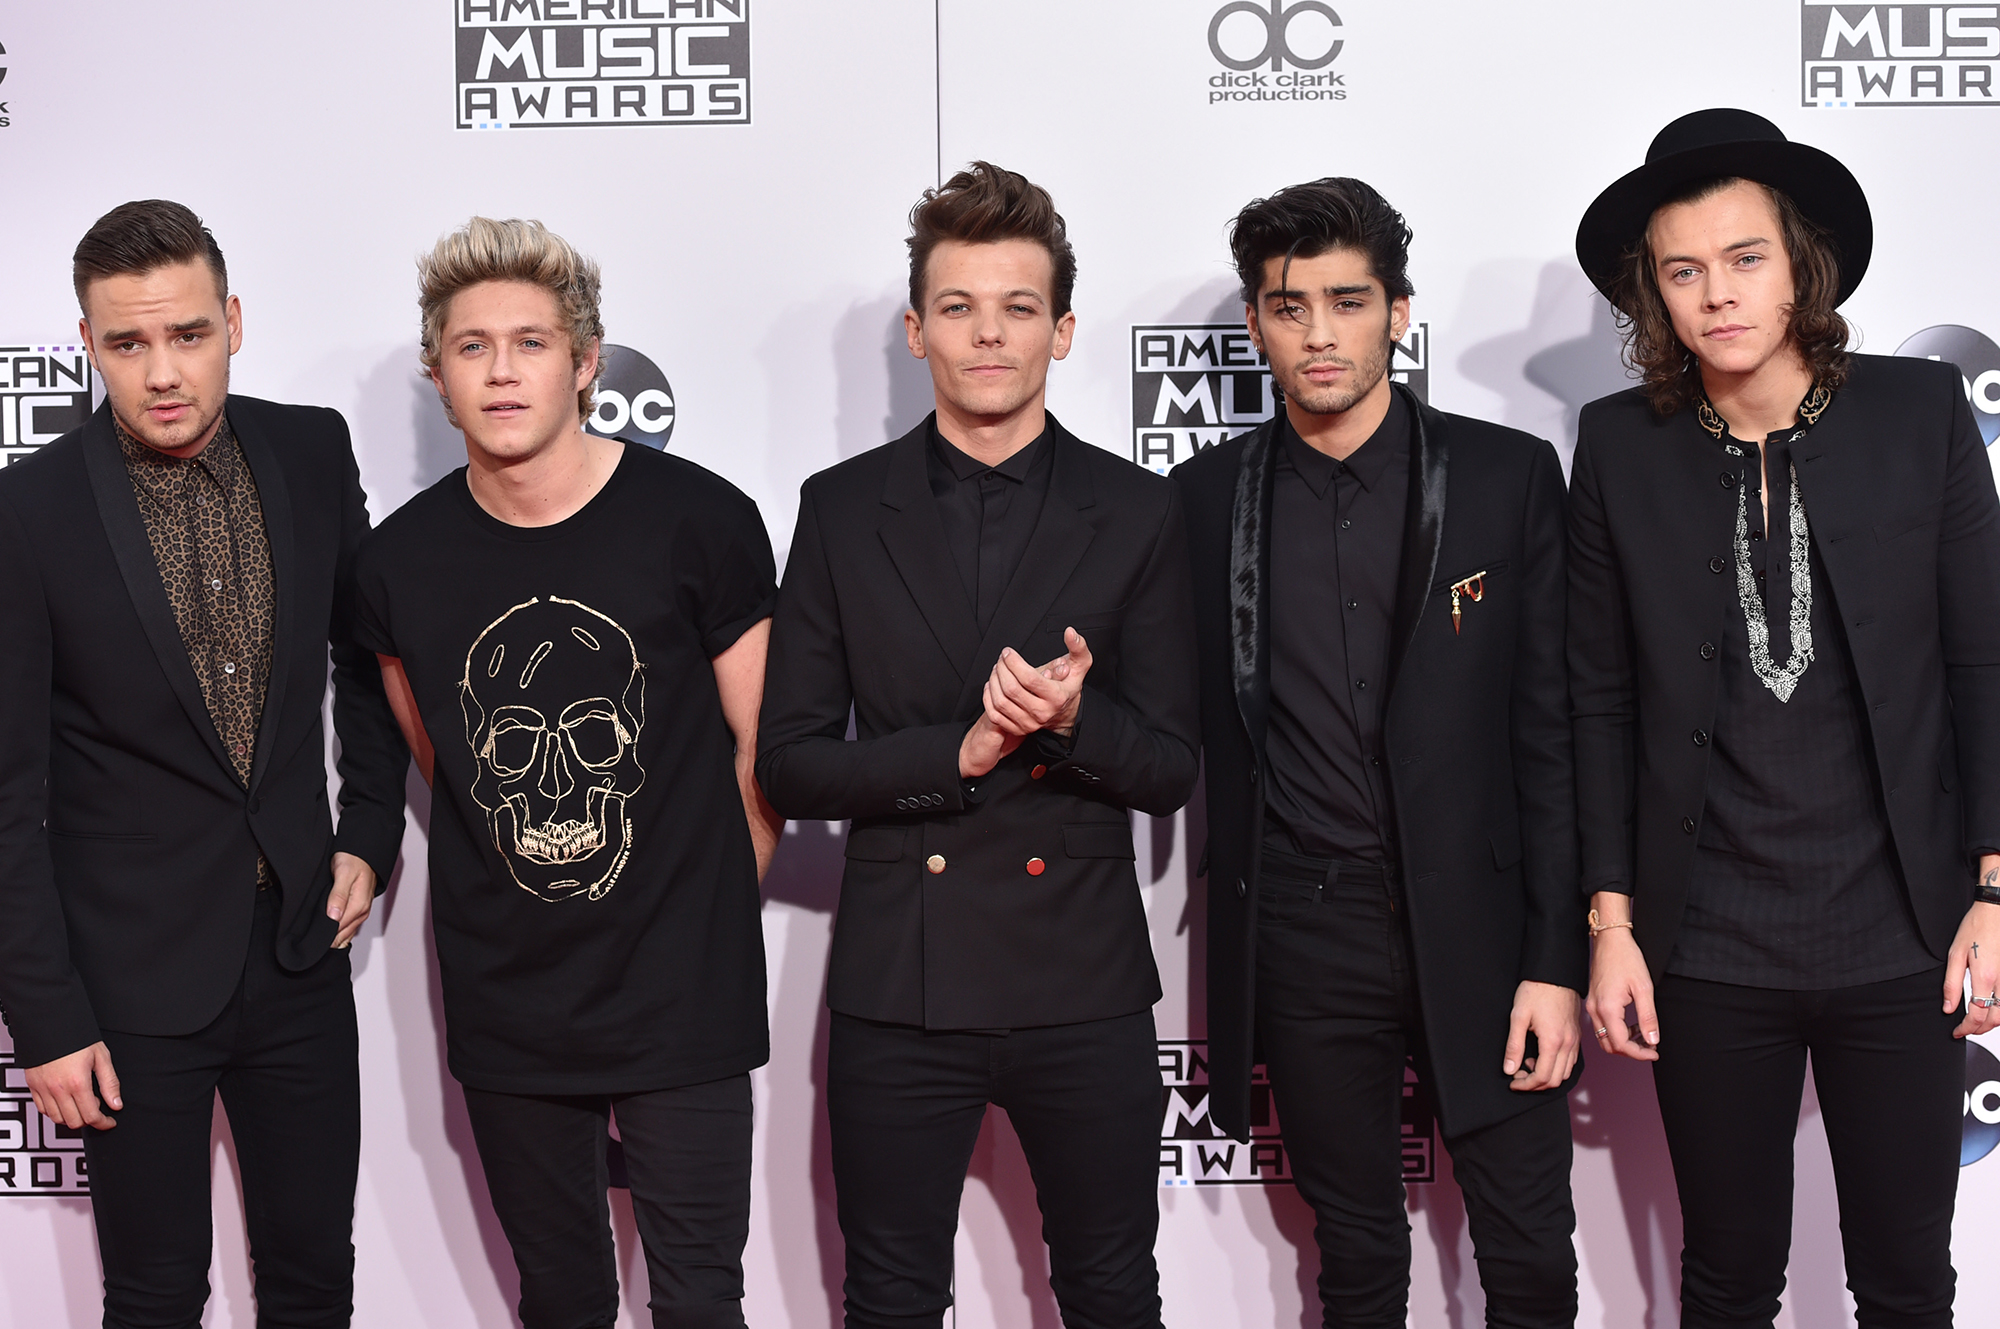 Zayn Malik didn't buy One Direction's new album because their music was  'never cool', The Independent